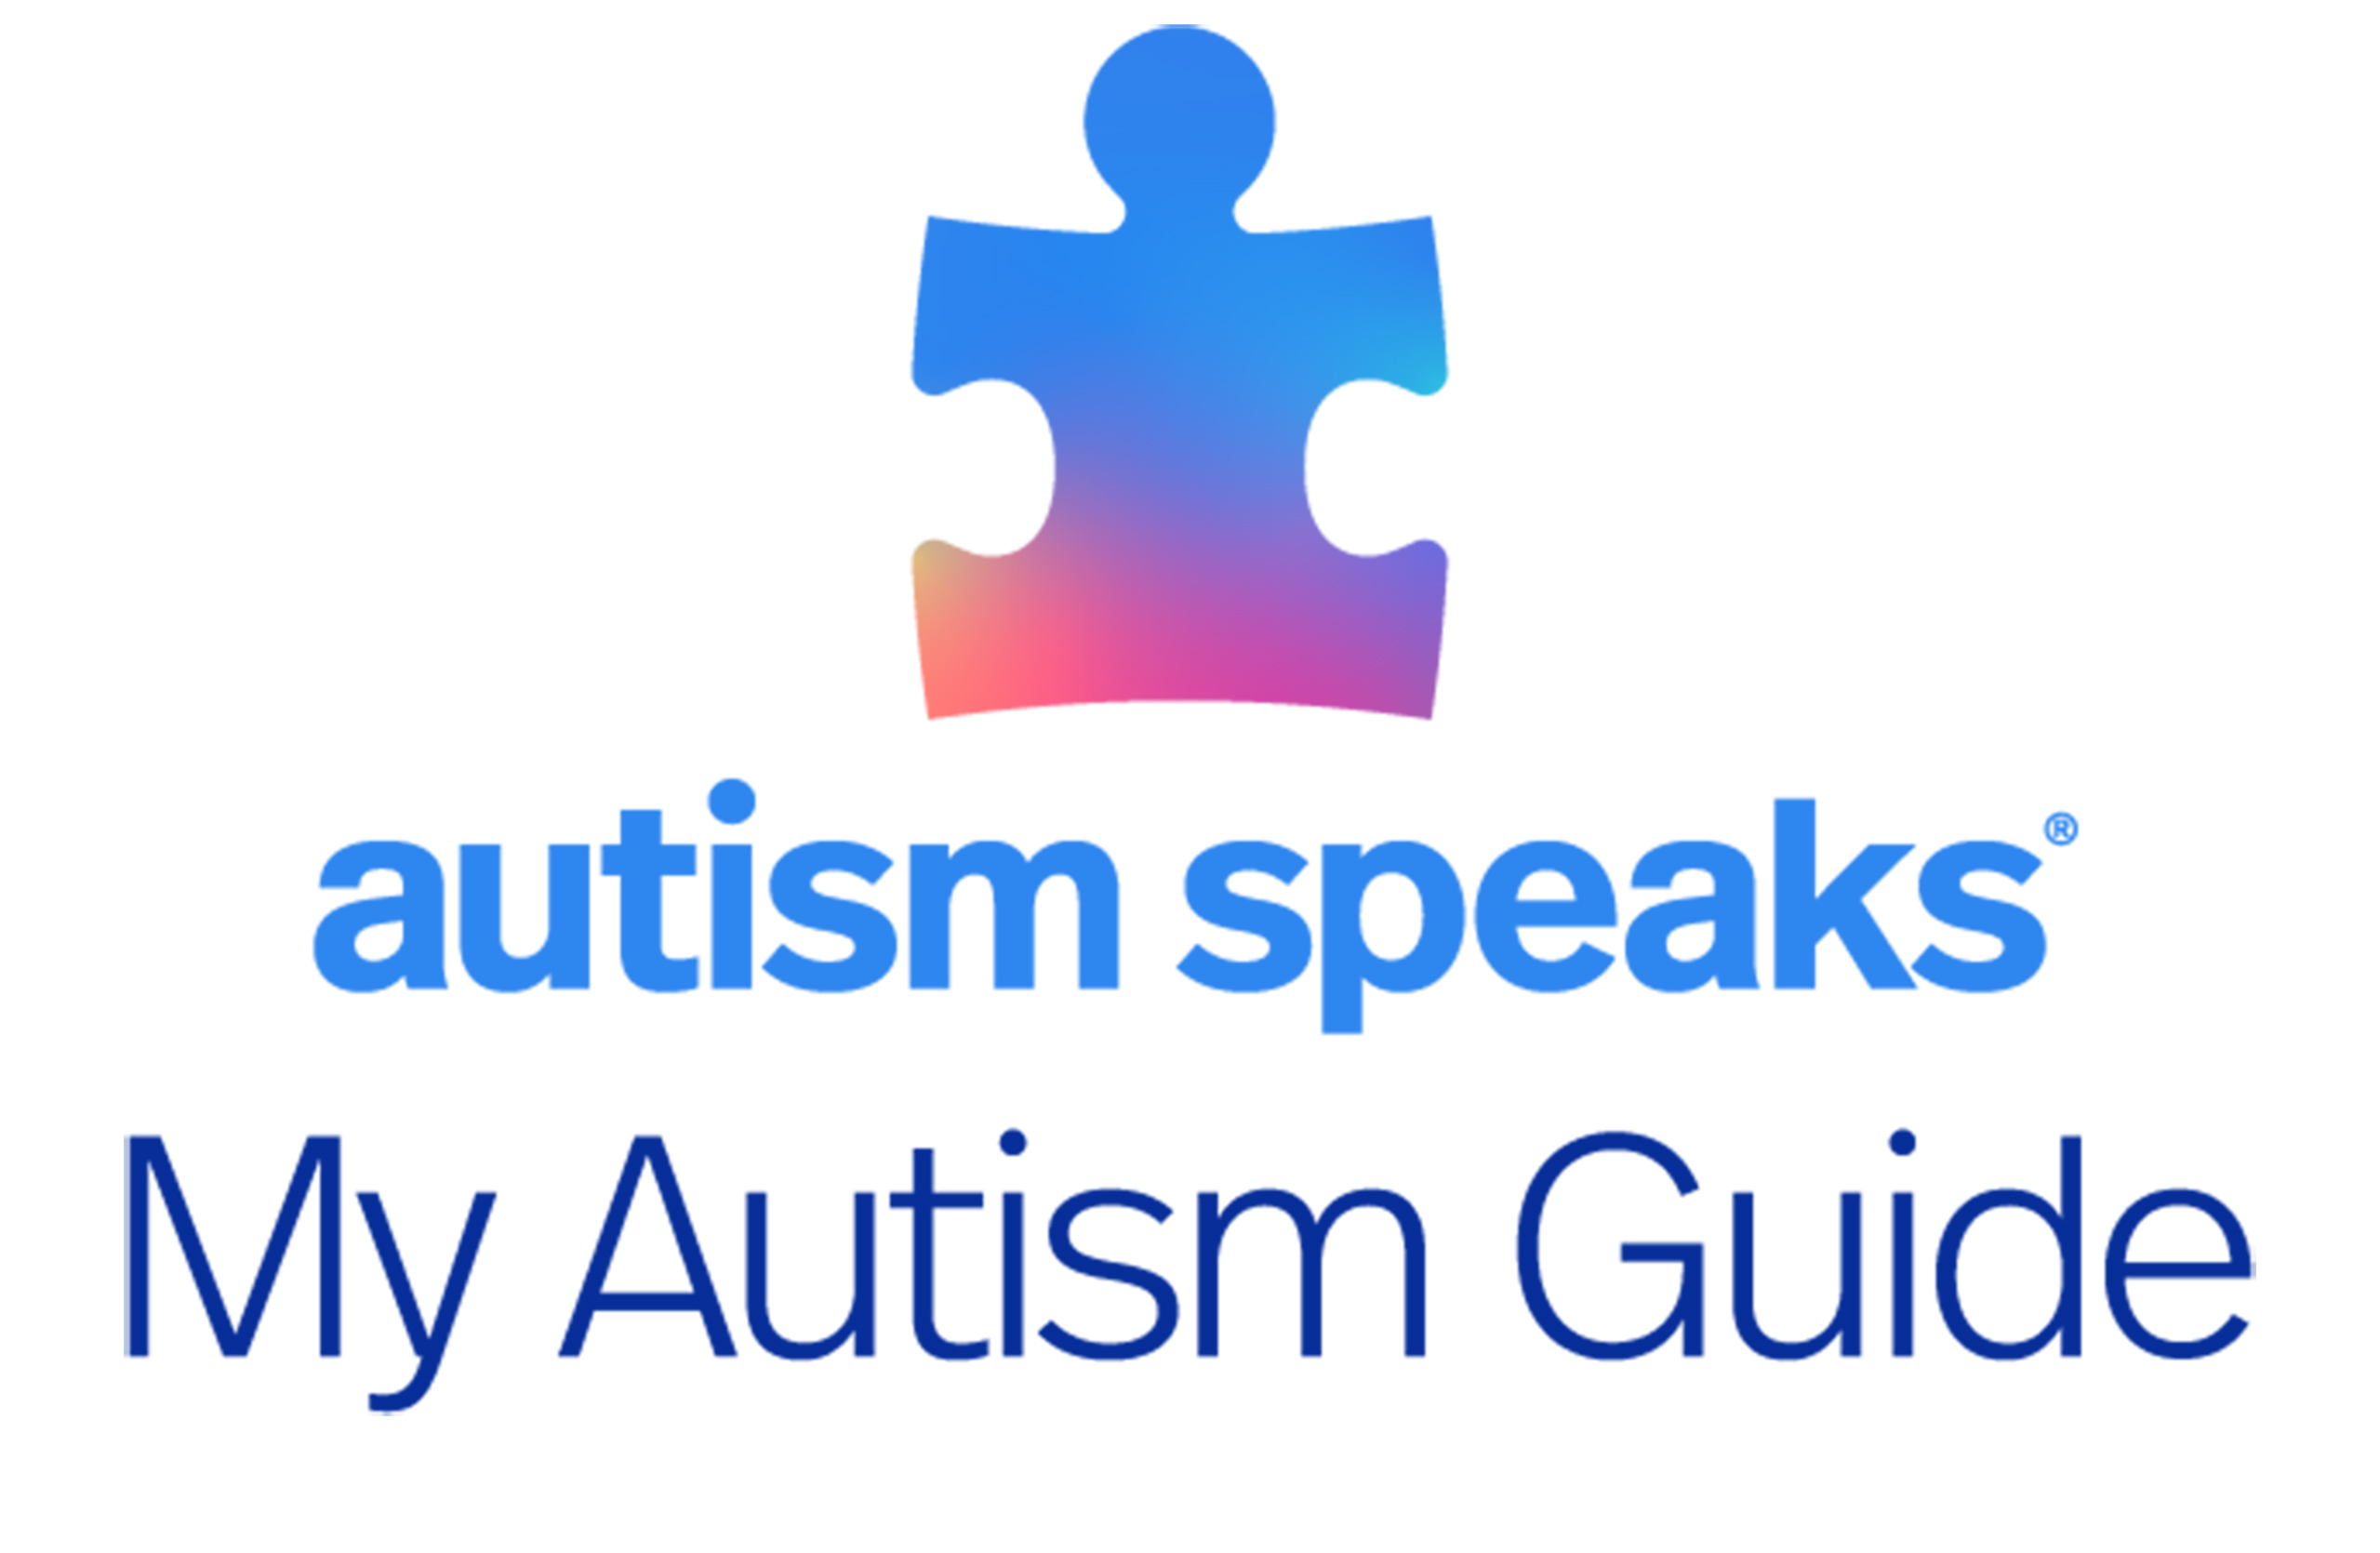 My Autism Guide logo